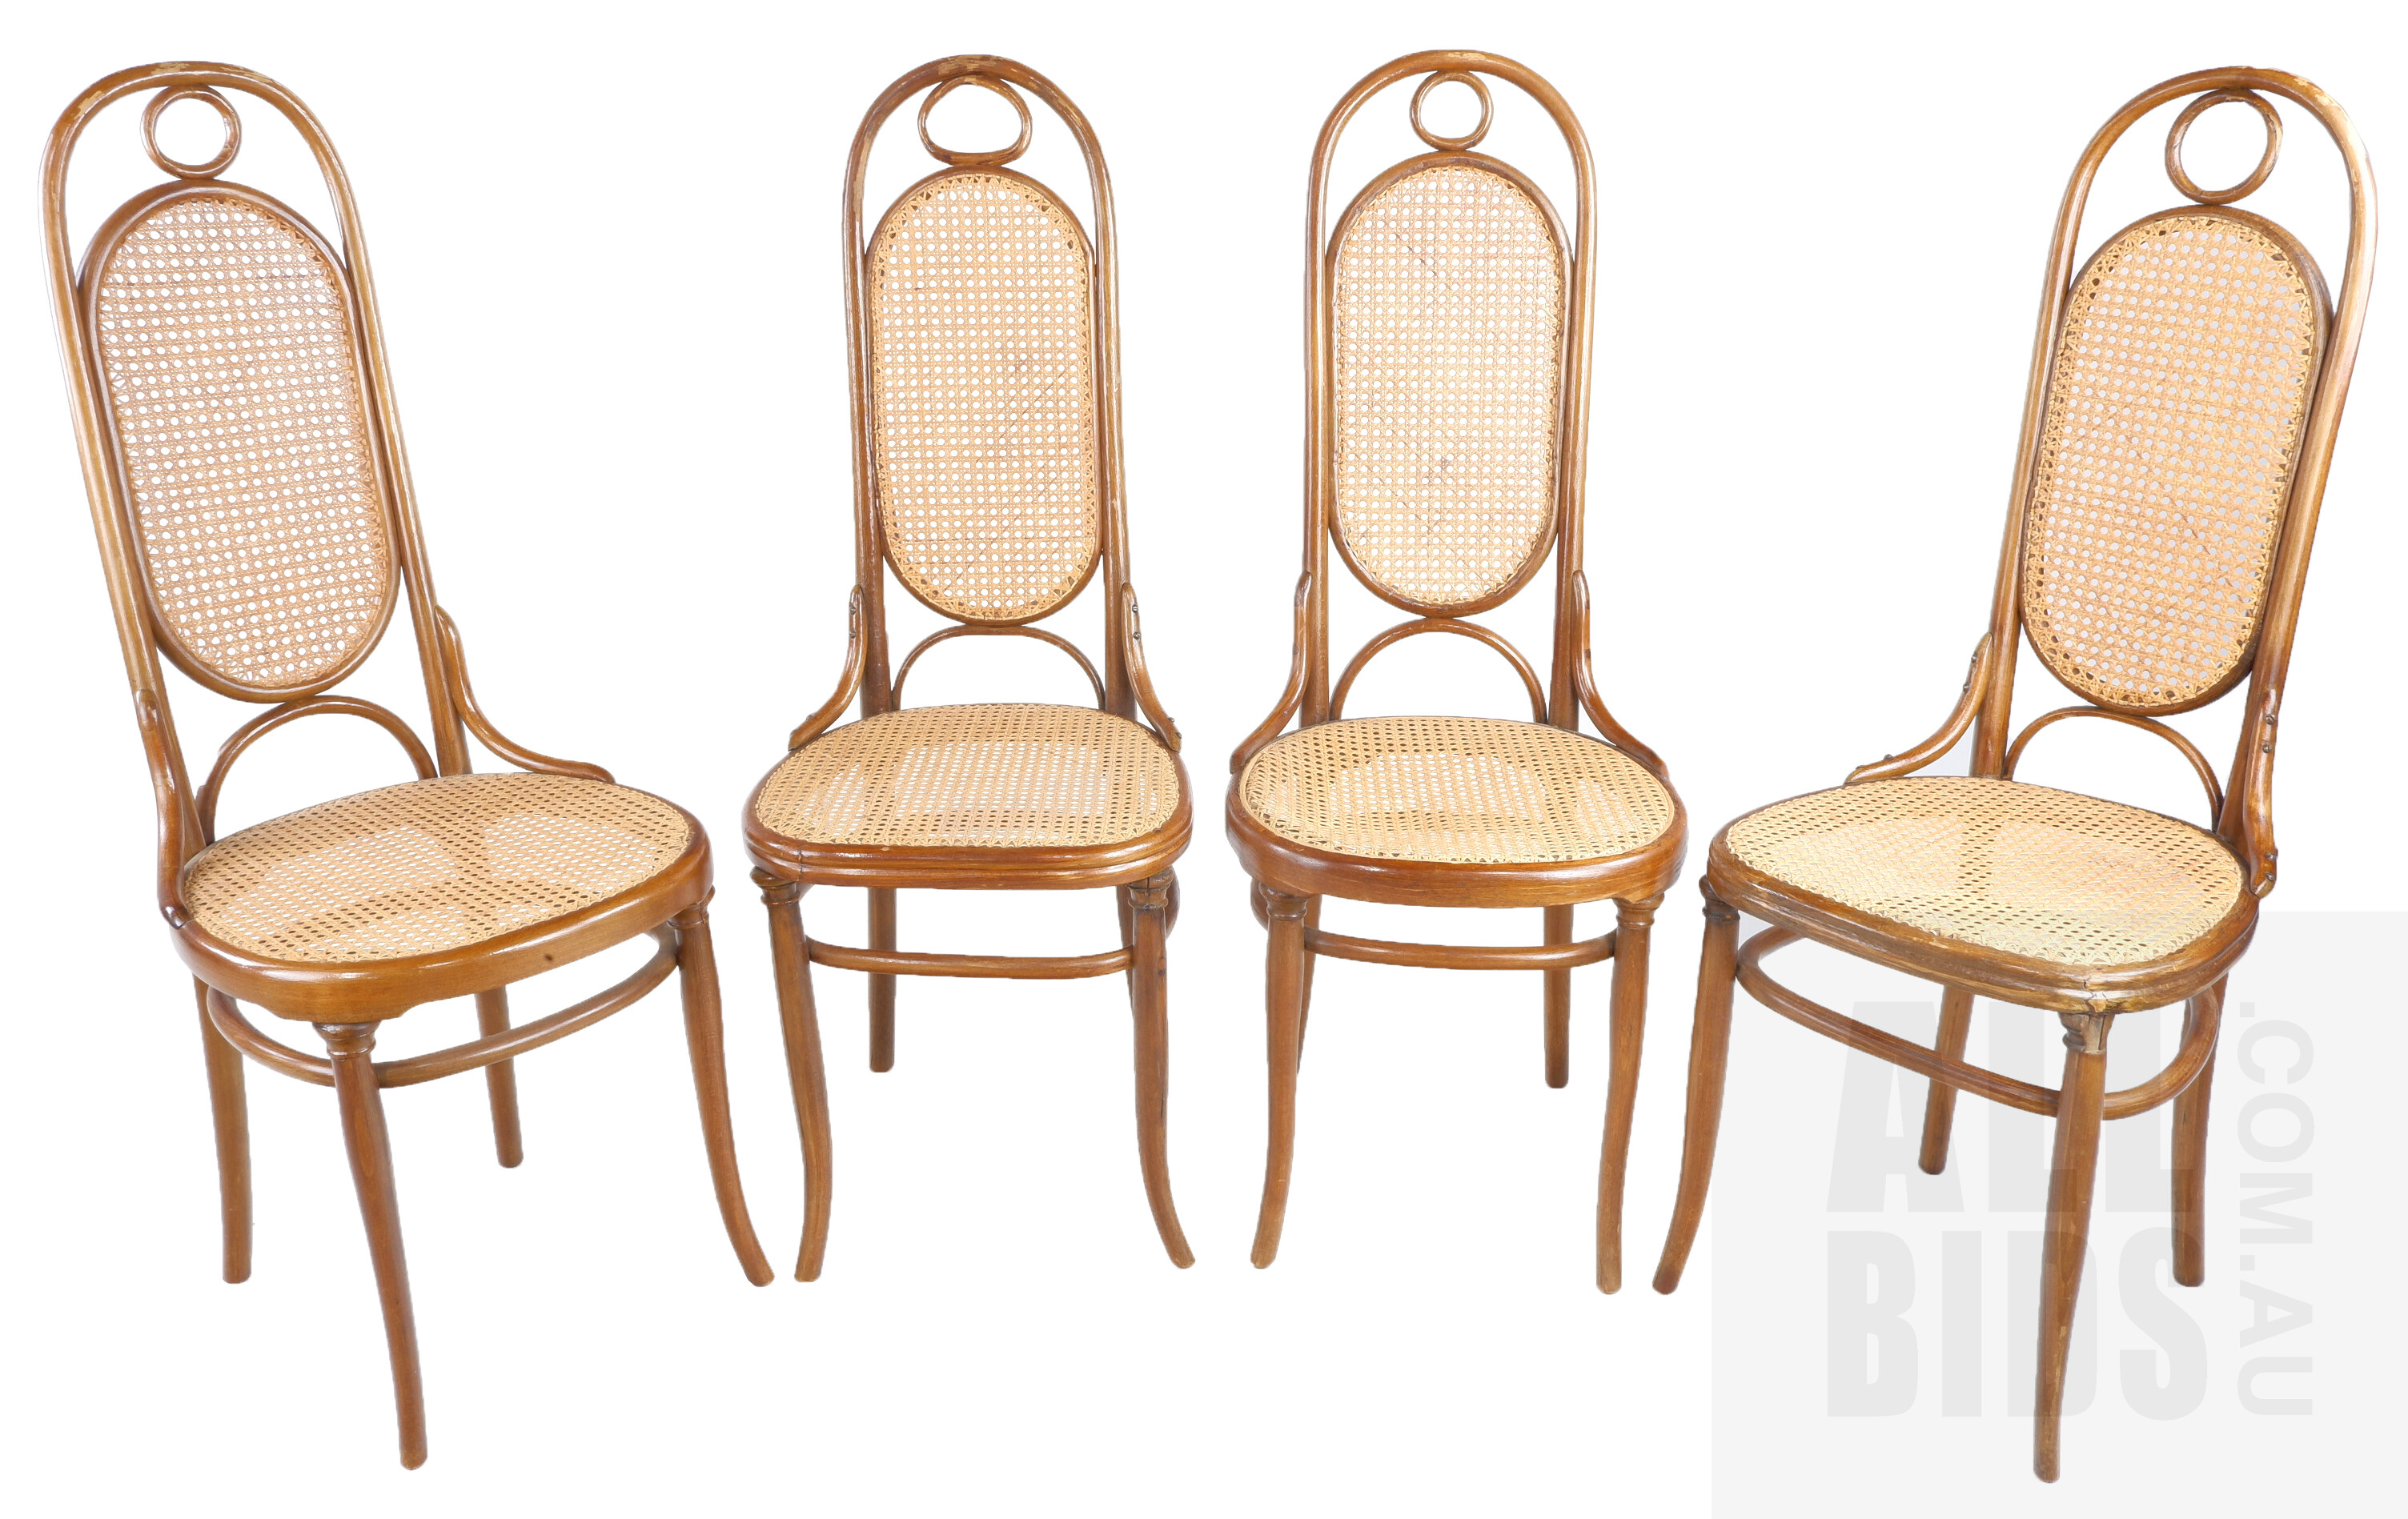 'Four Thonet High Back Bentwood and Rattan N17 Dining Chairs'